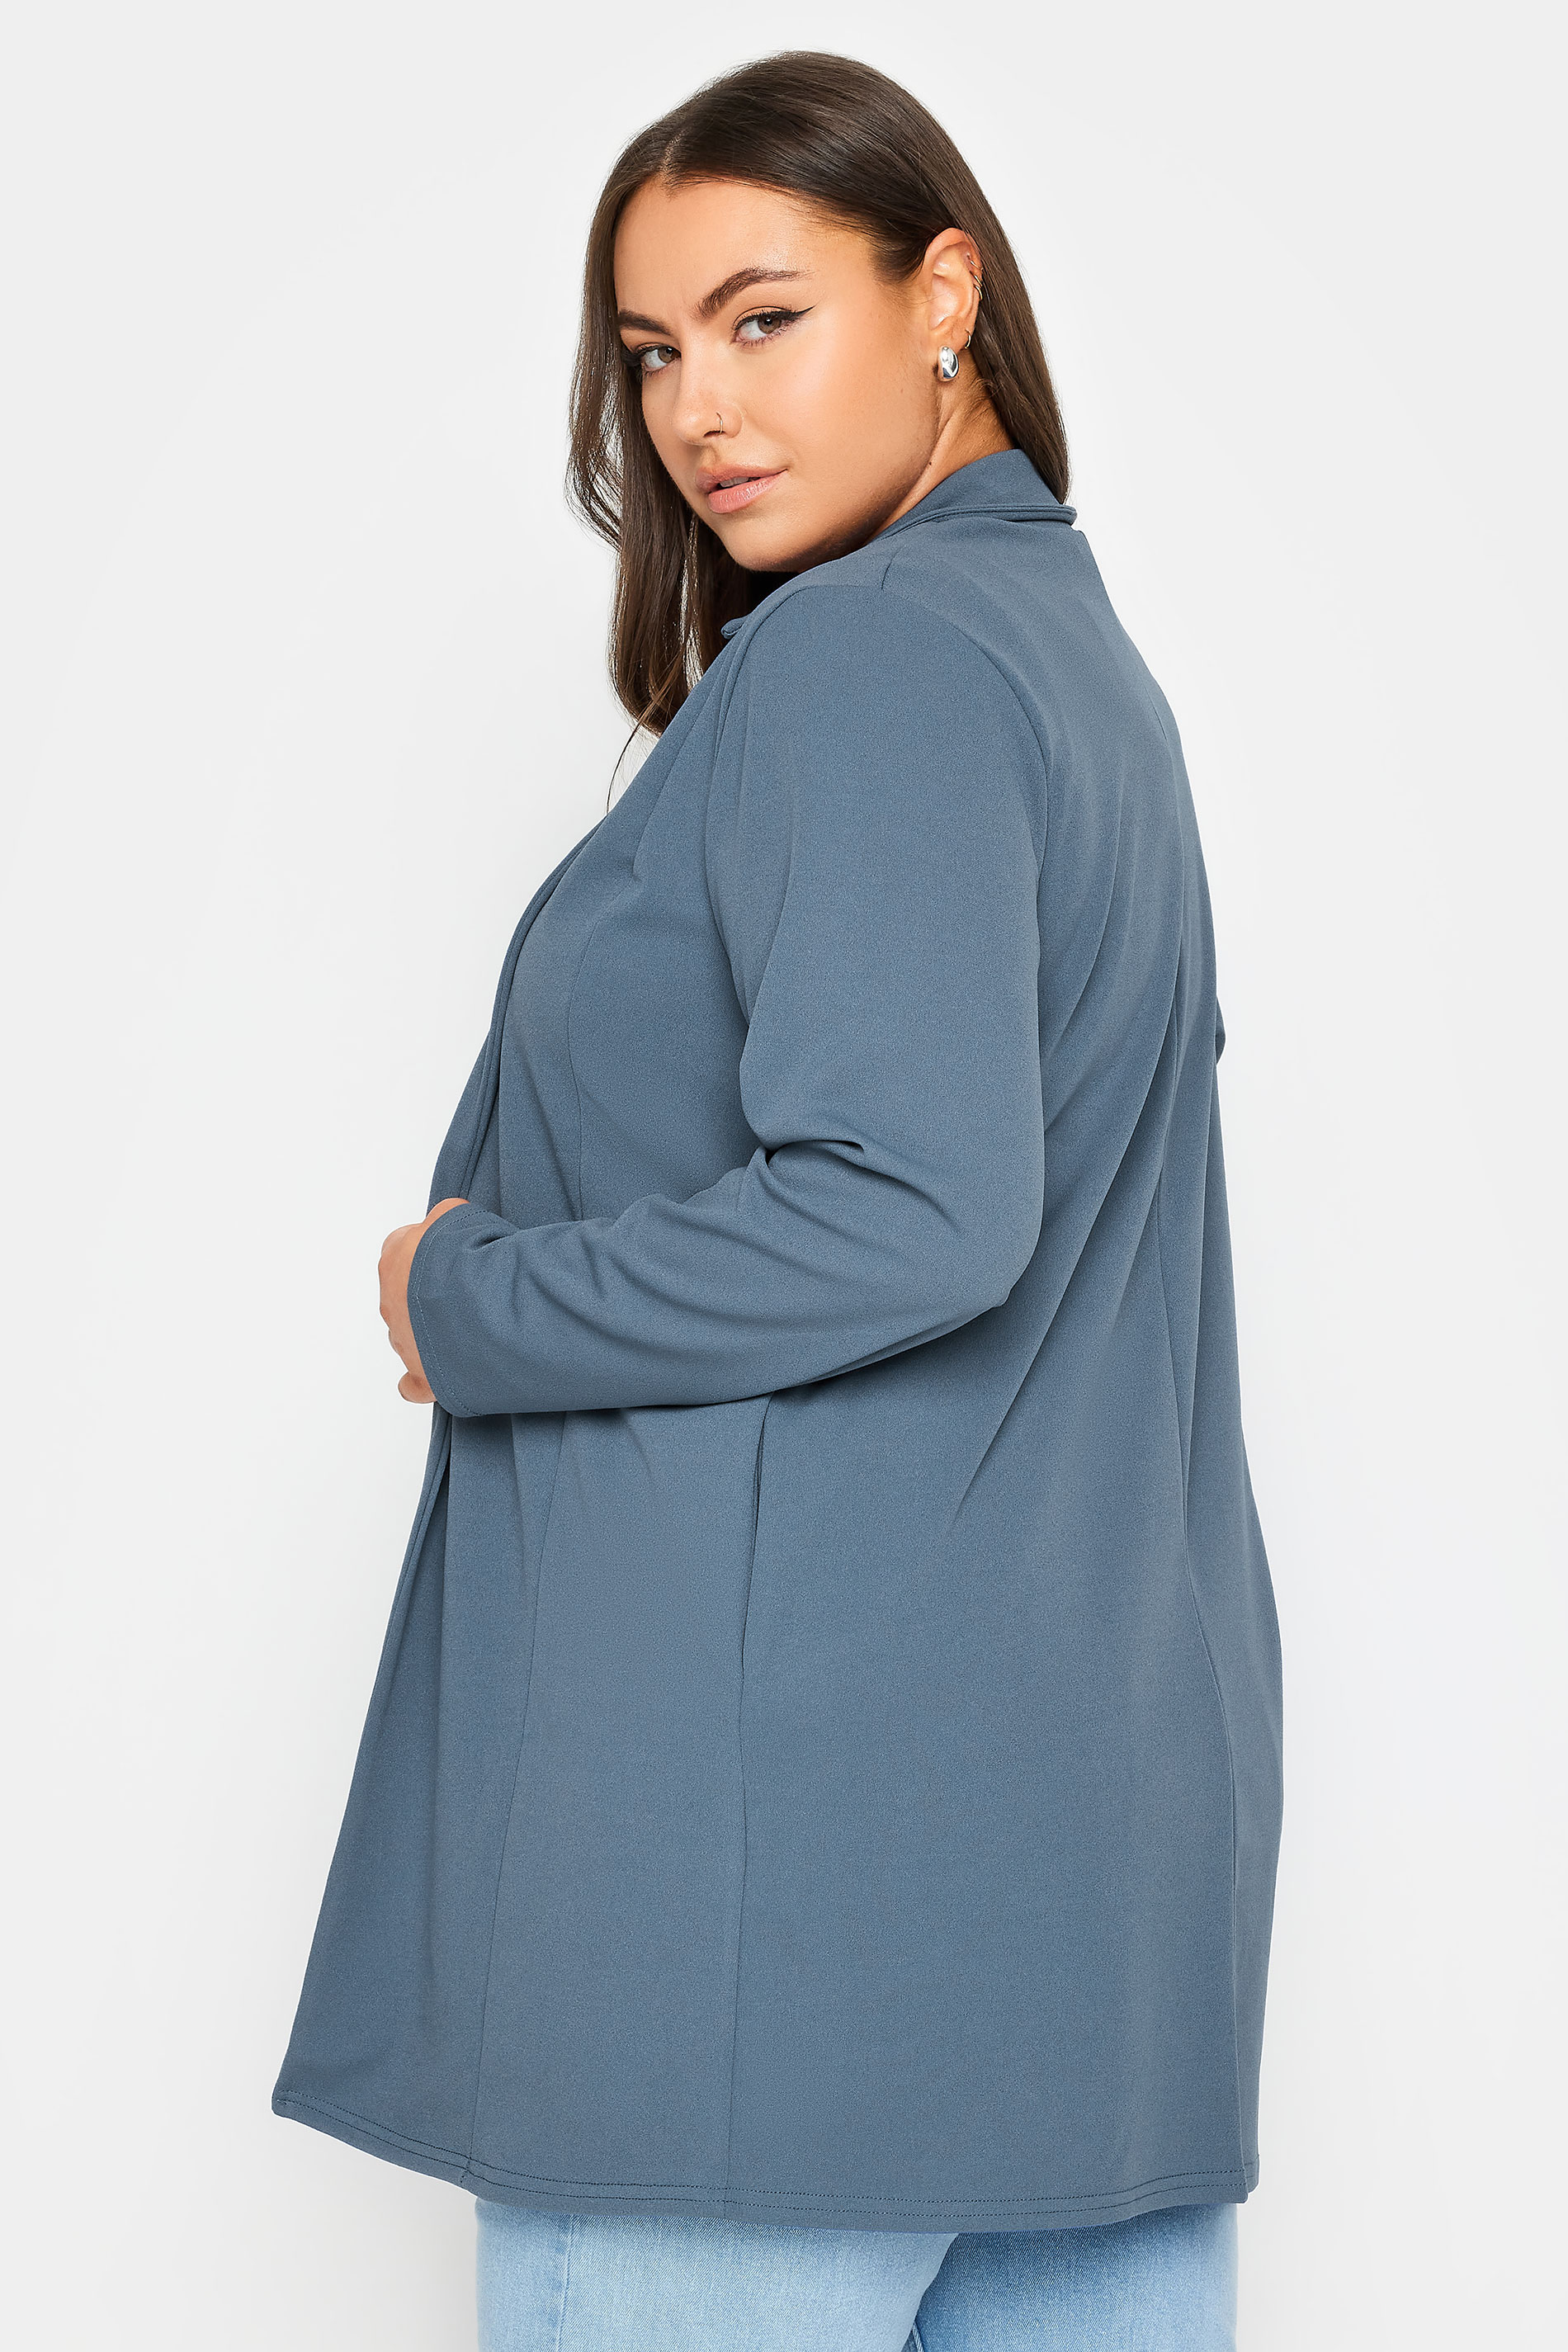 YOURS Plus Size Blue Blazer | Yours Clothing 3